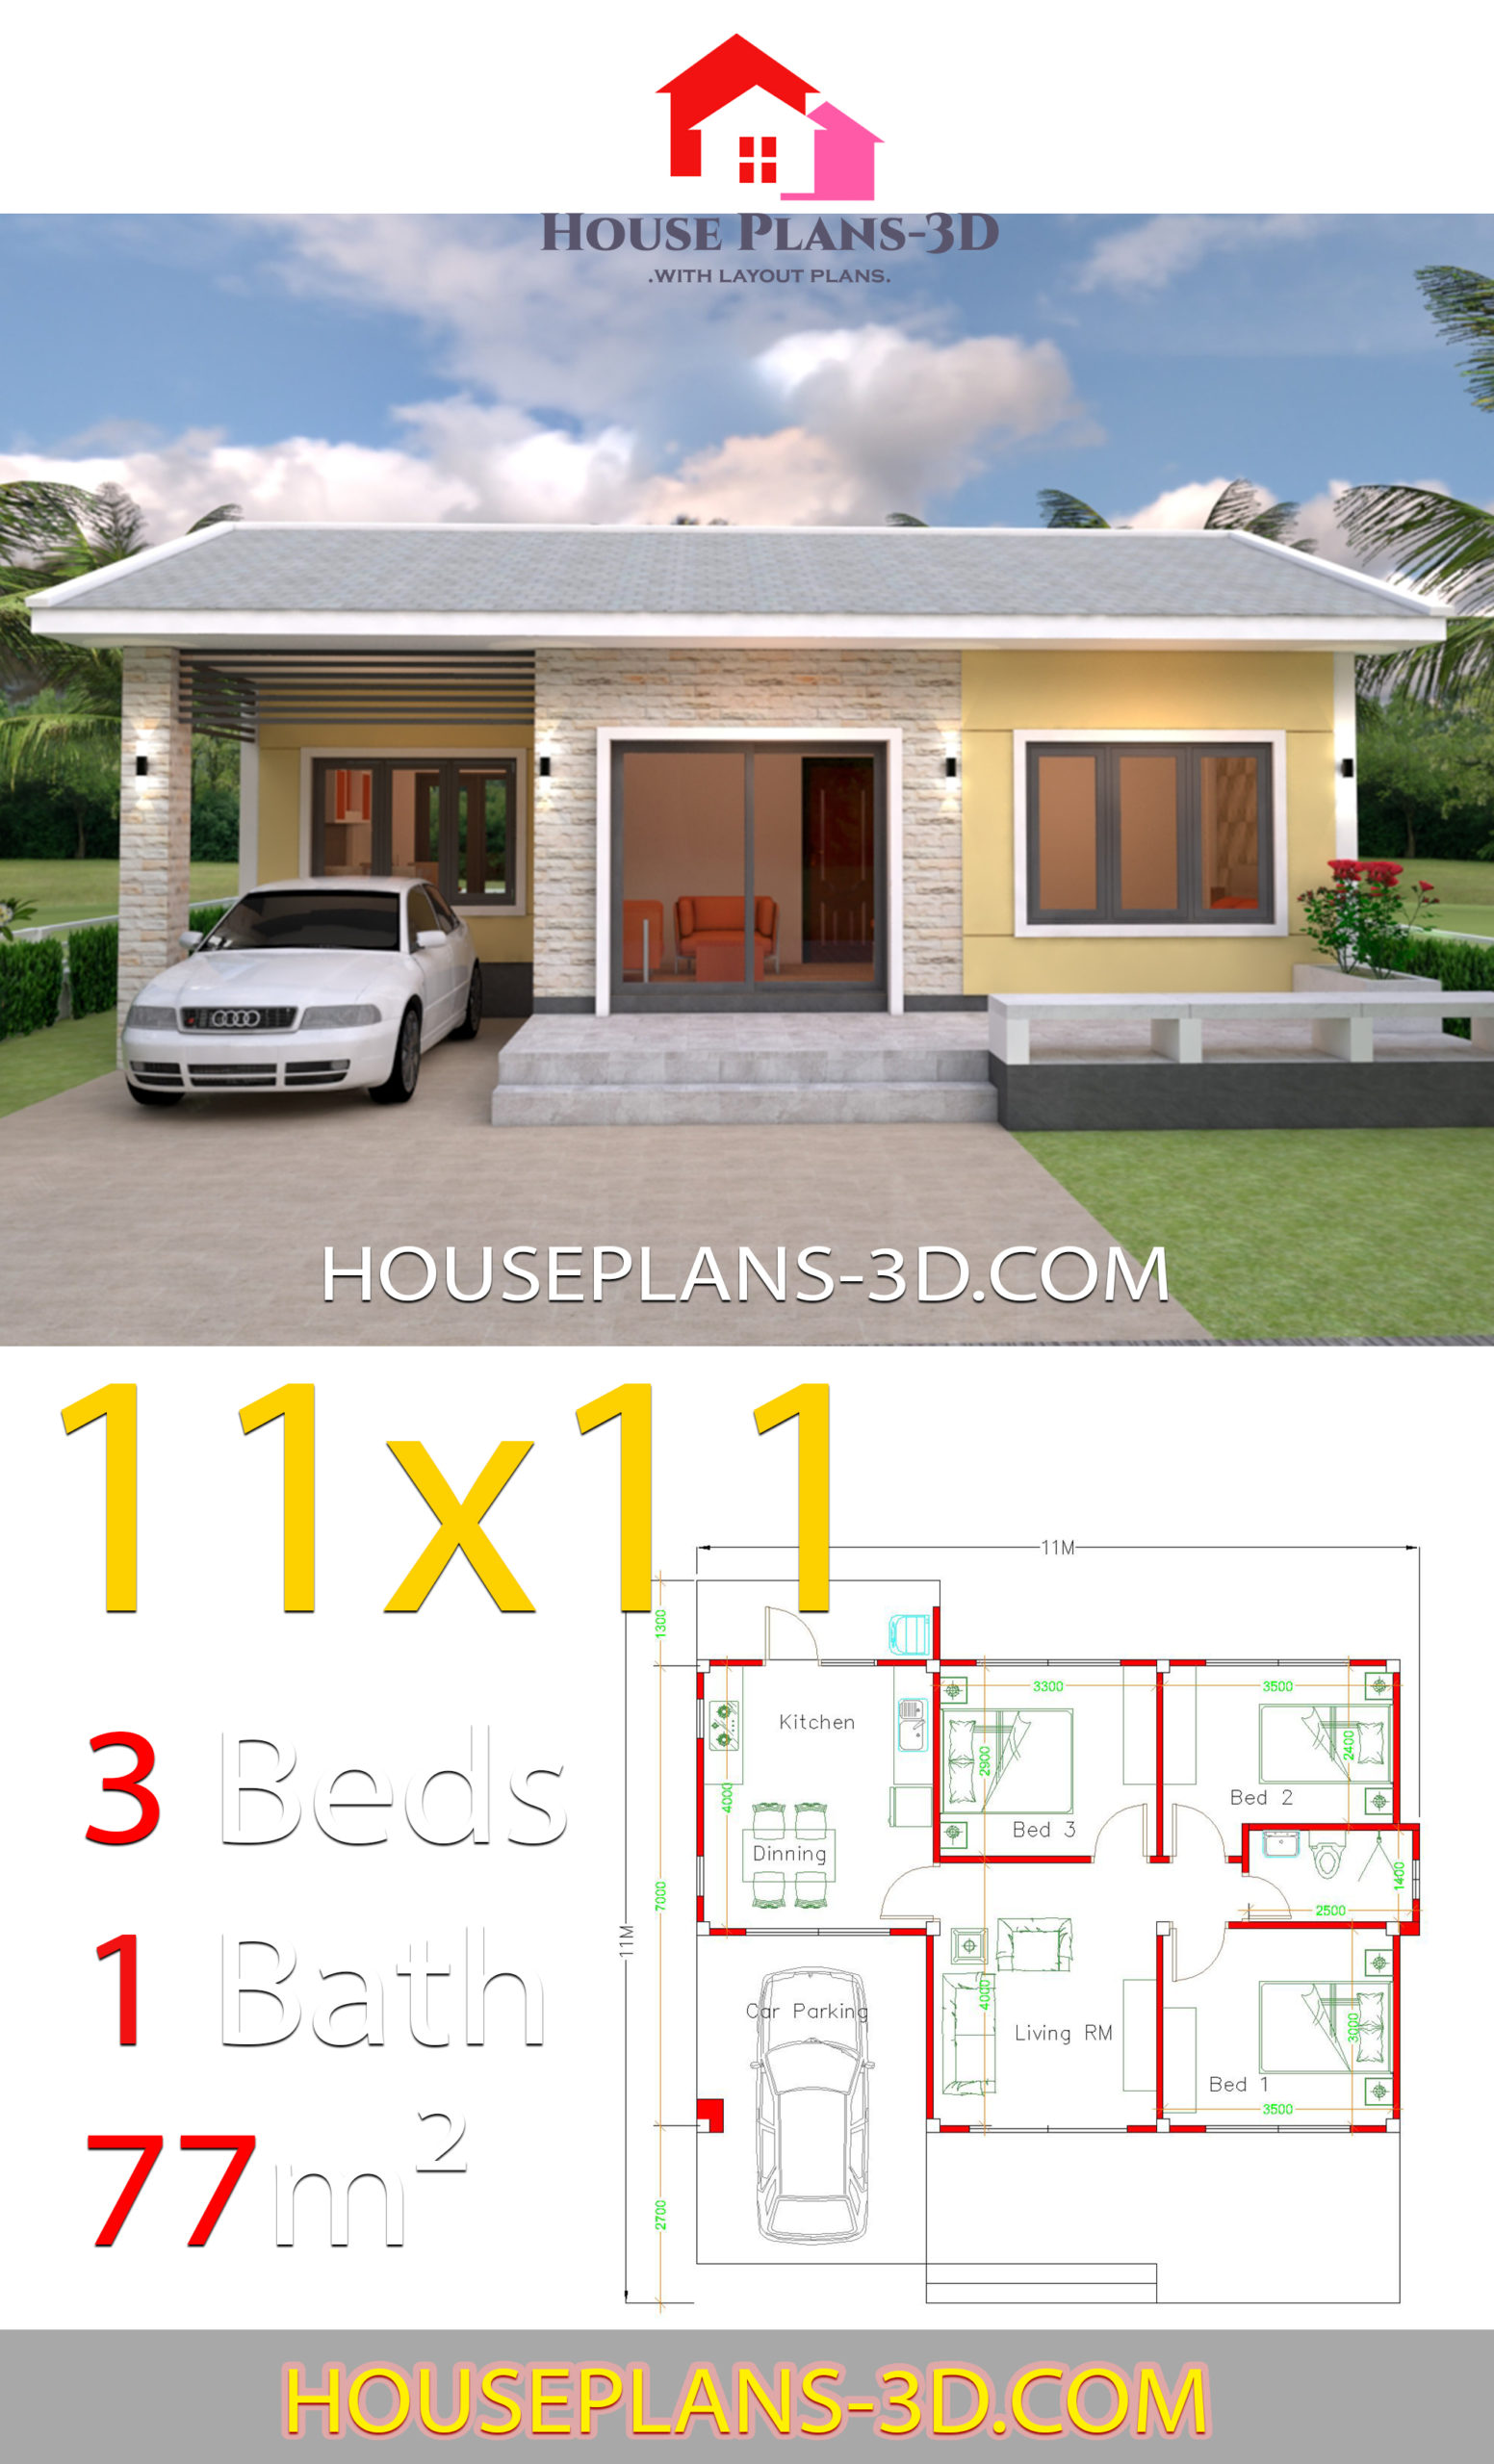 Simple House Design Plans 11x11 with 3 Bedrooms - House Plans 3D